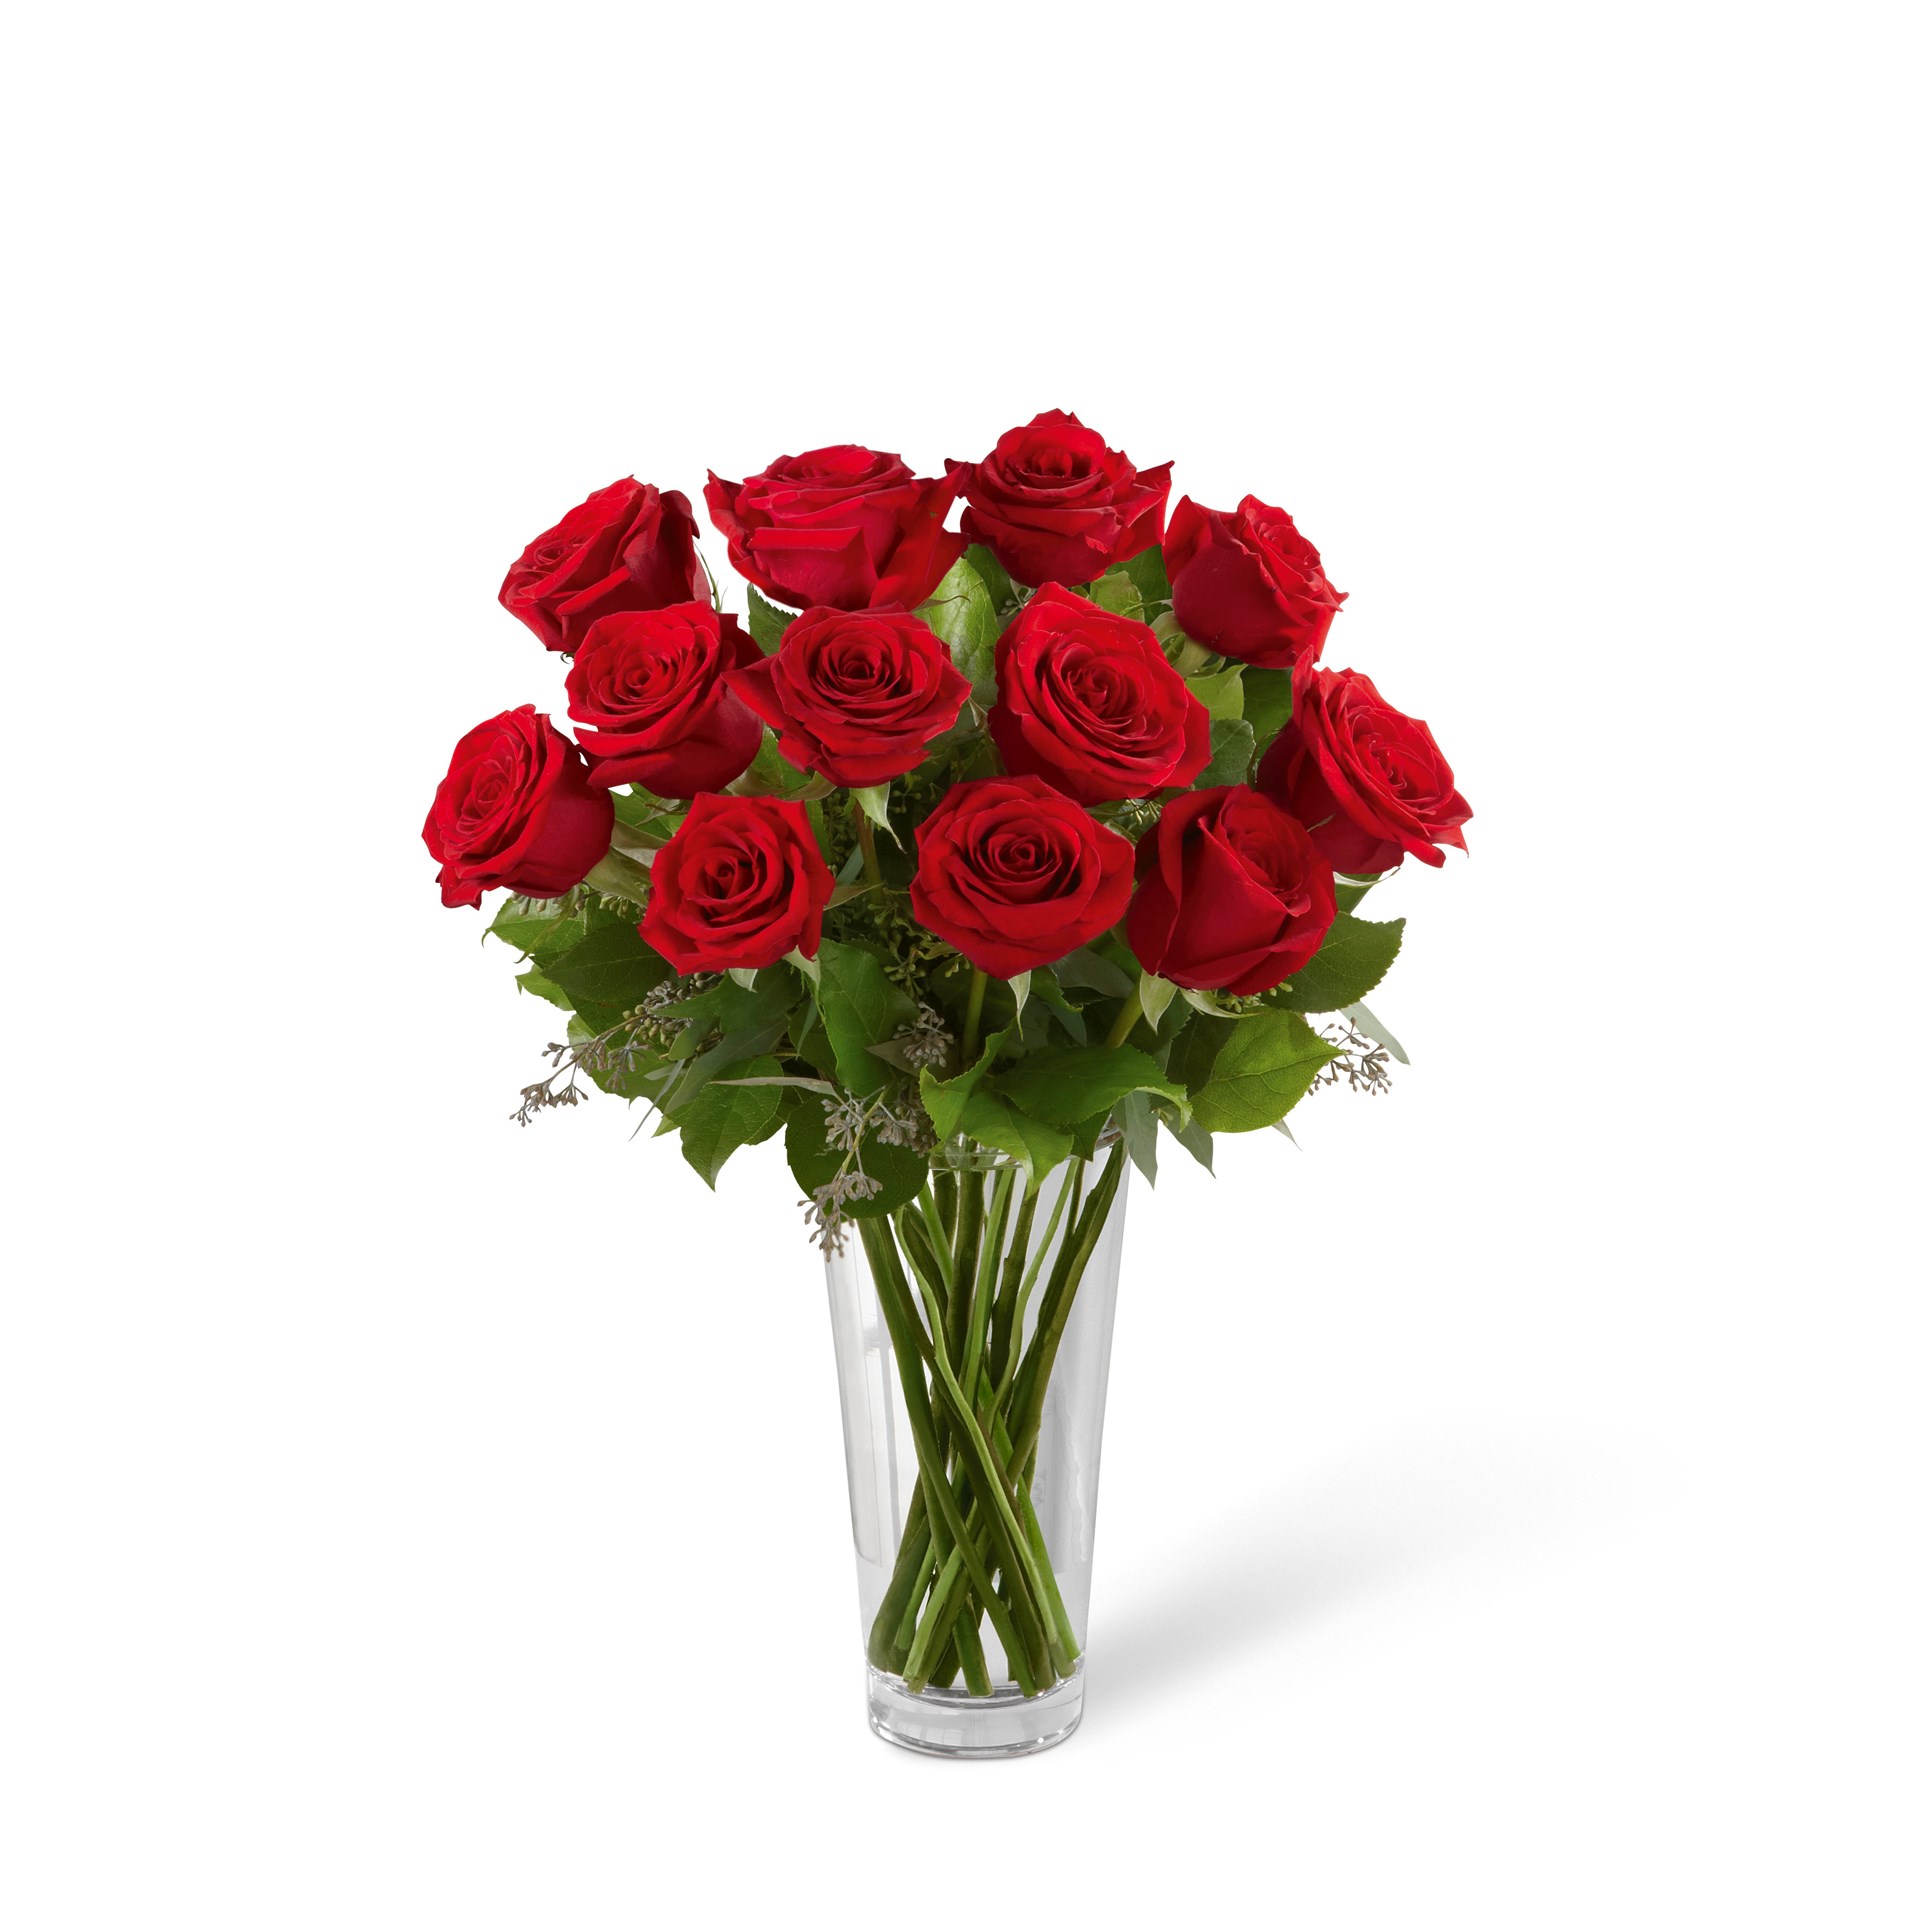 product image for The Long Stem Red Rose Bouquet by FTD